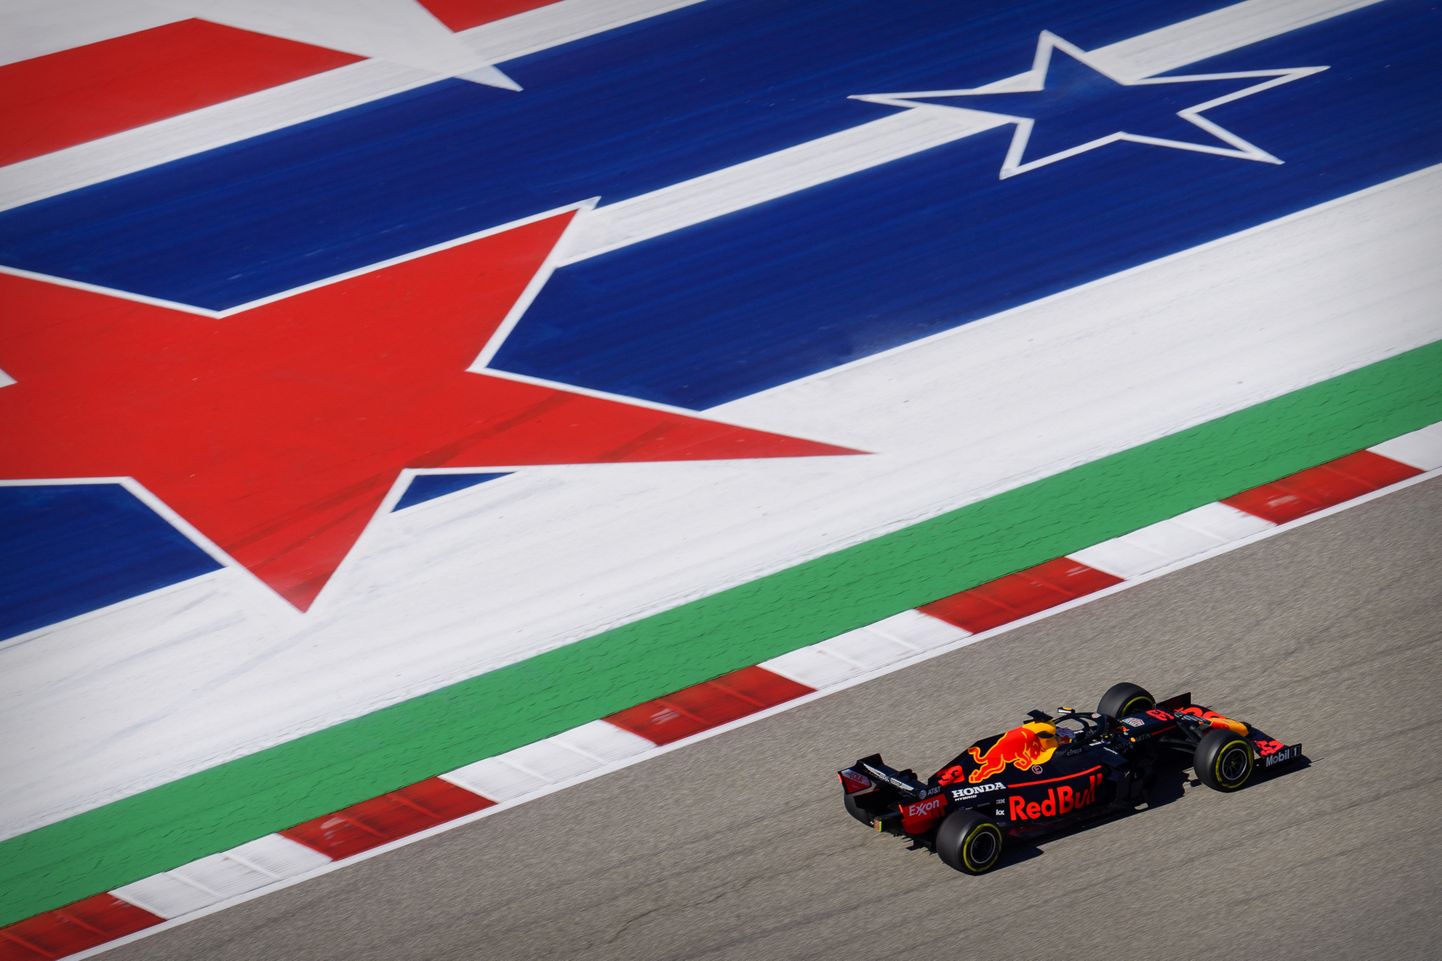 Nov 1, 2019; Austin, TX, USA; Red Bull Racing Honda driver Max Verstappen (33) of Netherlands during practice for the United States Grand Prix at Circuit of the Americas. Mandatory Credit: Jerome Miron-USA TODAY Sports